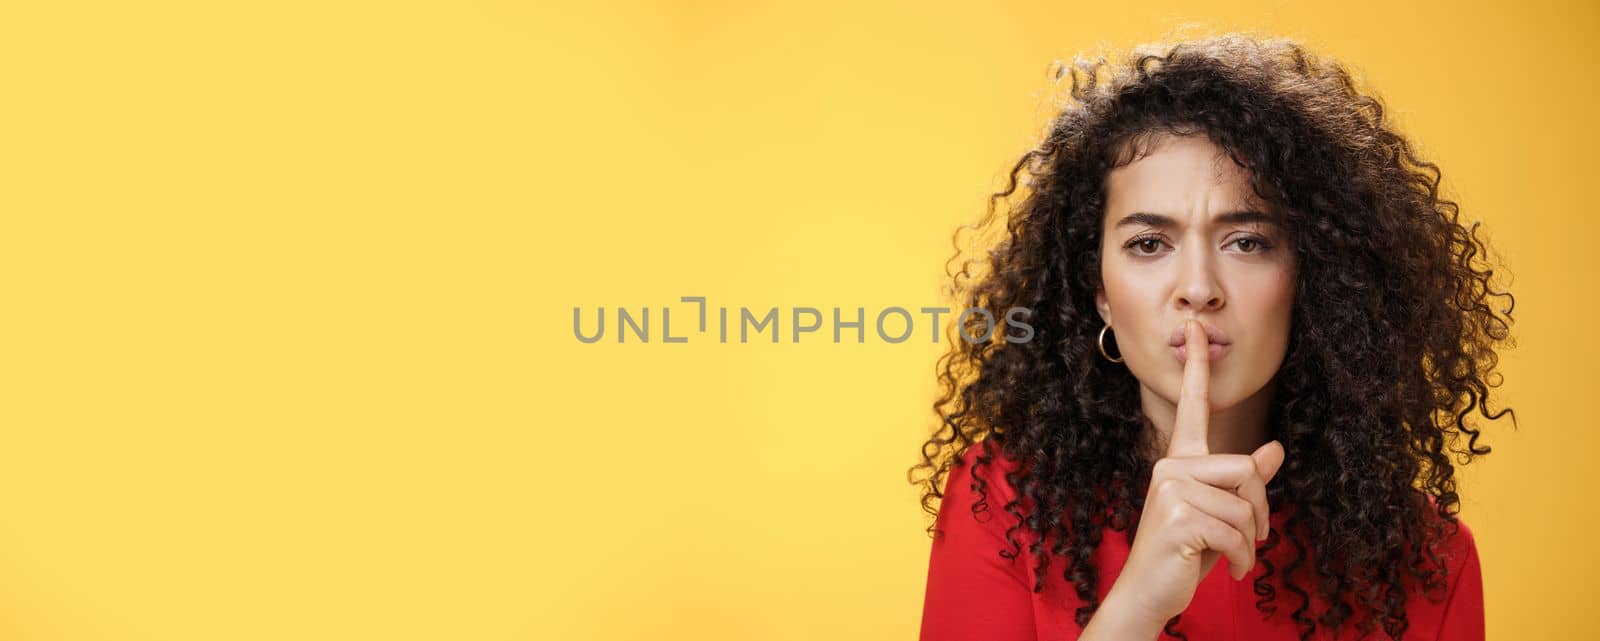 Shh not say word. Portrait of serious-looking sexy young woman with curly hair showing shush gesture with index finger over folded lips frowning asking keep secret promise keep silent over yellow wall.